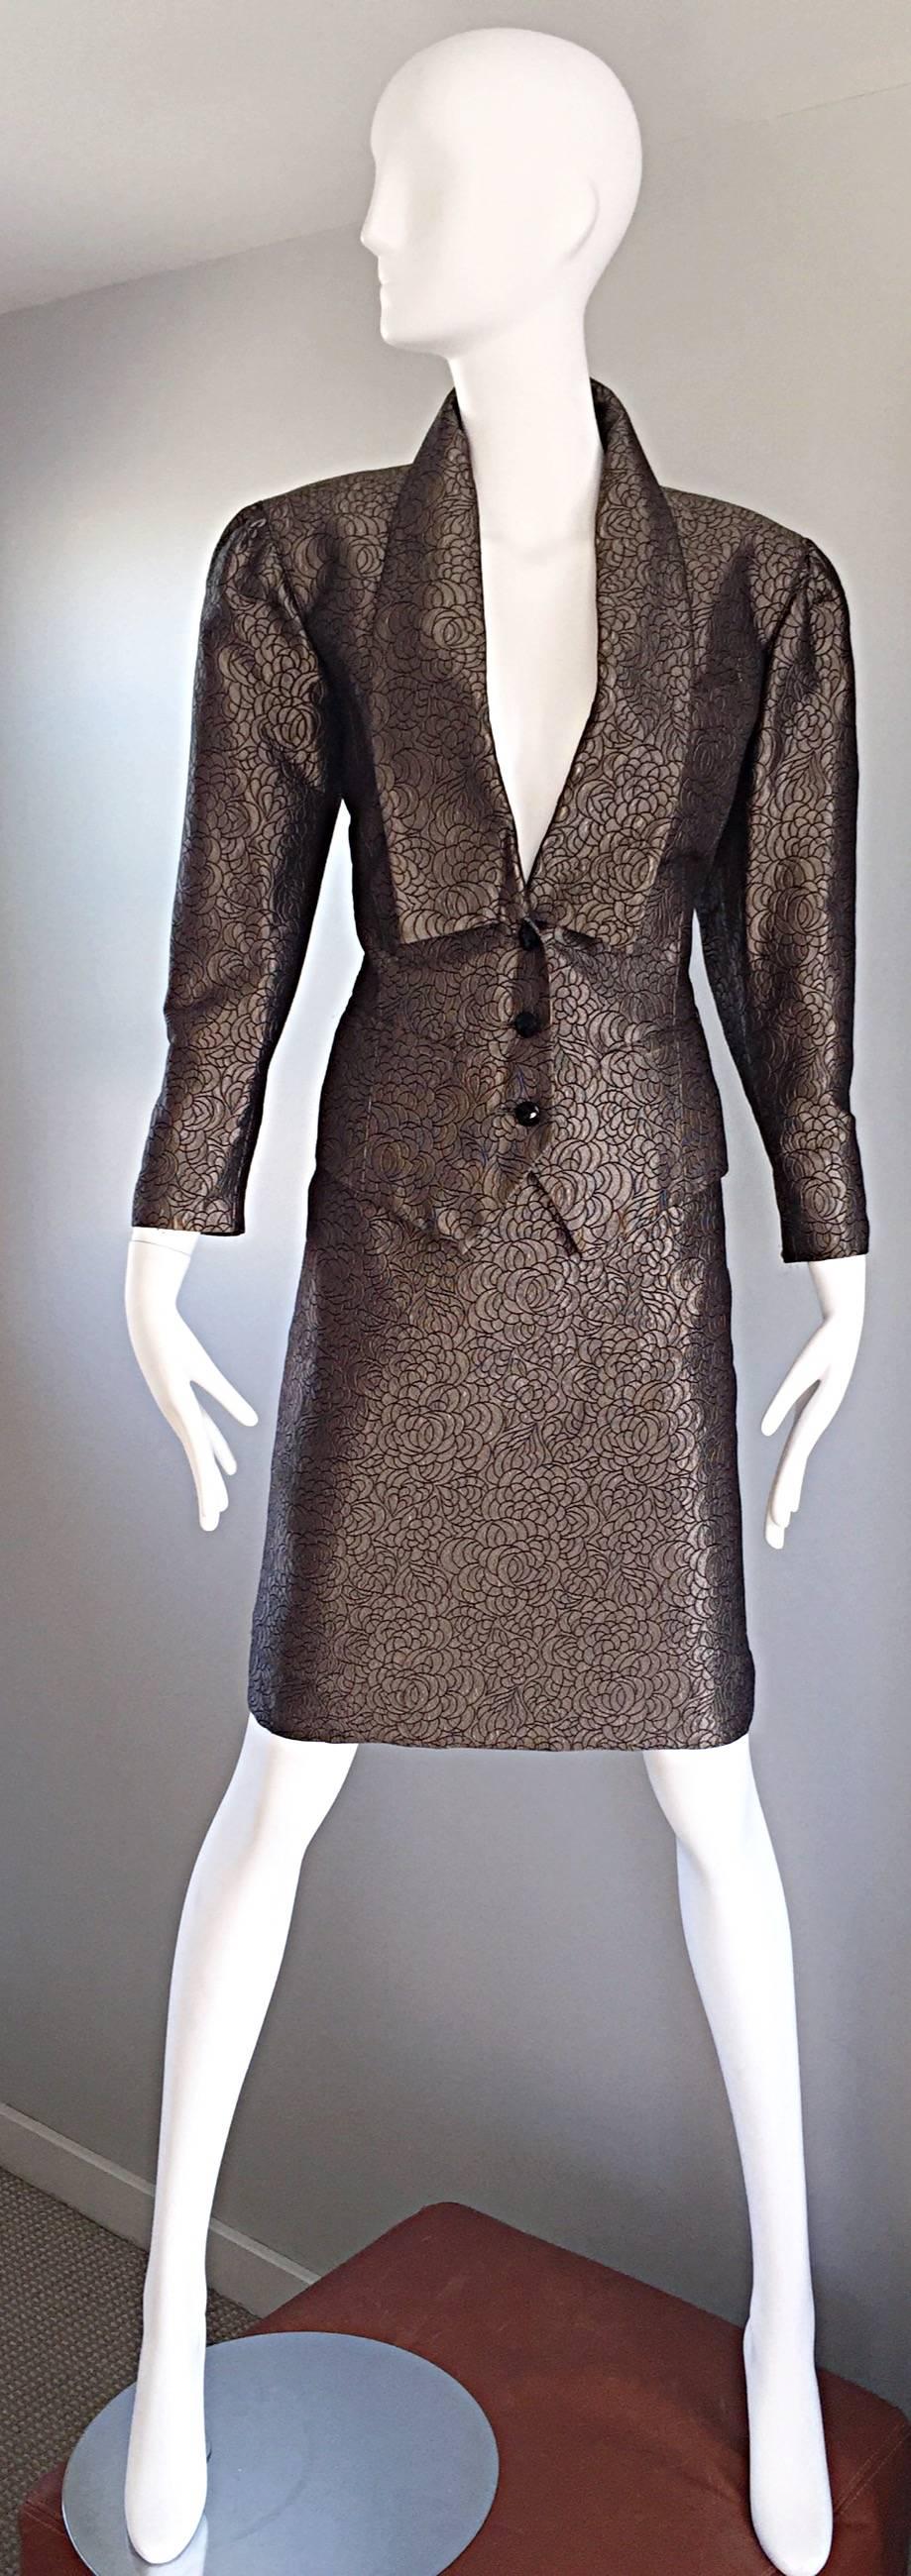 Sensational vintage TED LAPIDUS Haute Couture taupe / bronze and black silk metallic brocade two piece jacket and skirt suit ensemble! Heavy attention to detail with an outstanding tailored fit! 1940s style with a fitted bodice wasp waist, with